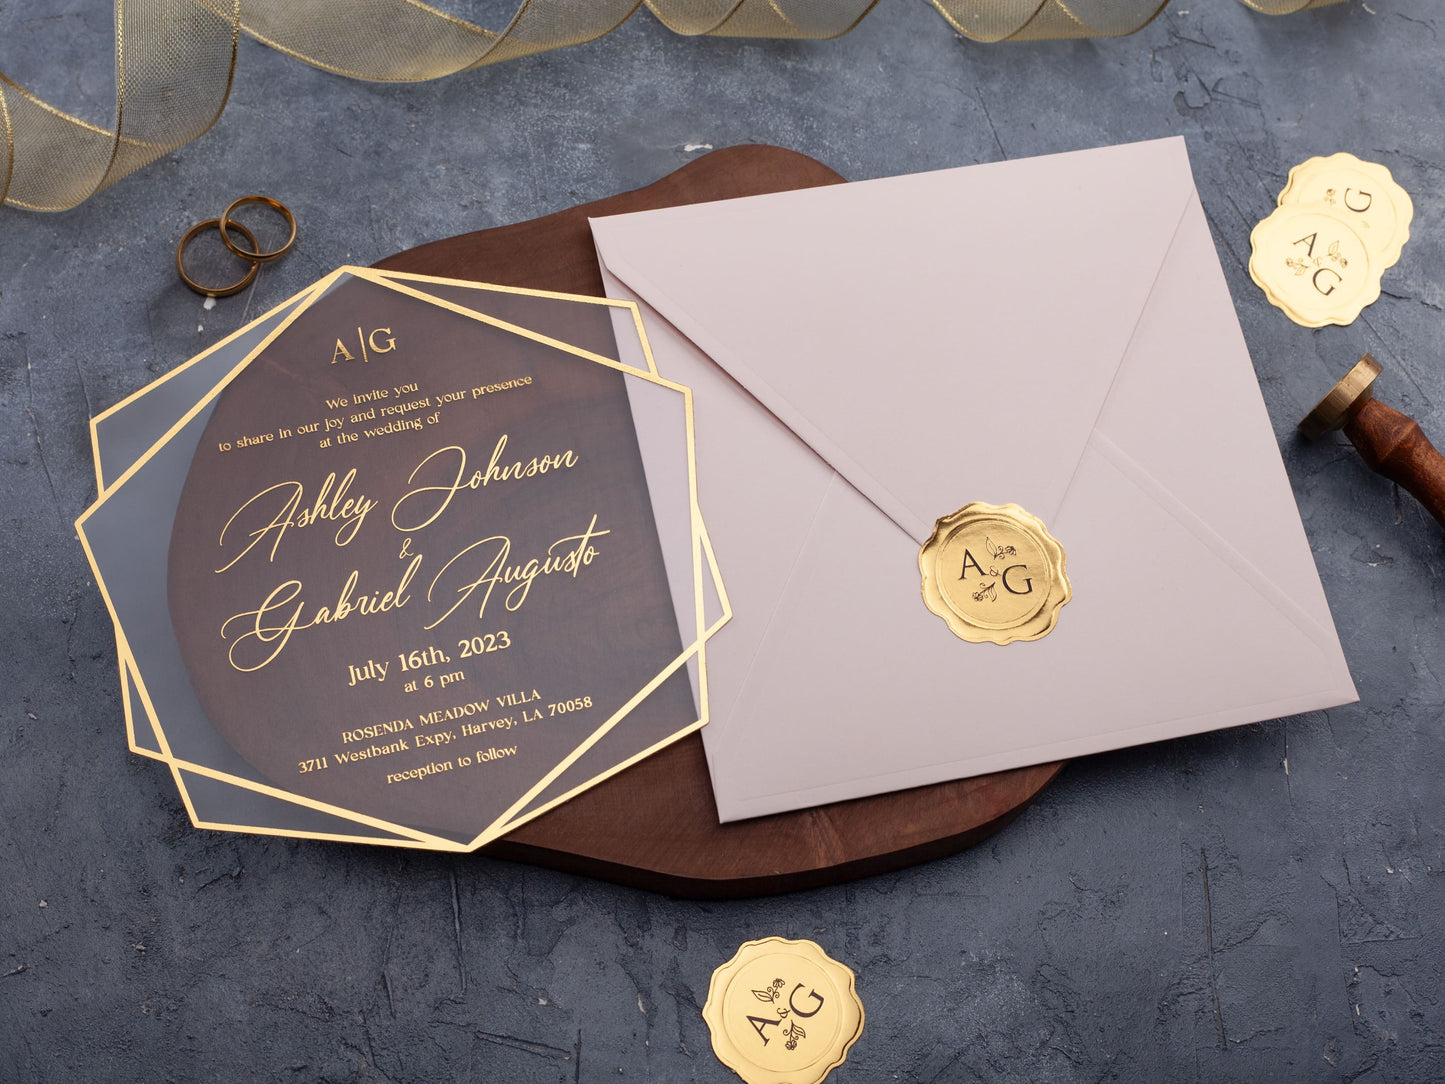 Acrylic Wedding Invitation with Blush Pink Envelope and Gold Foil